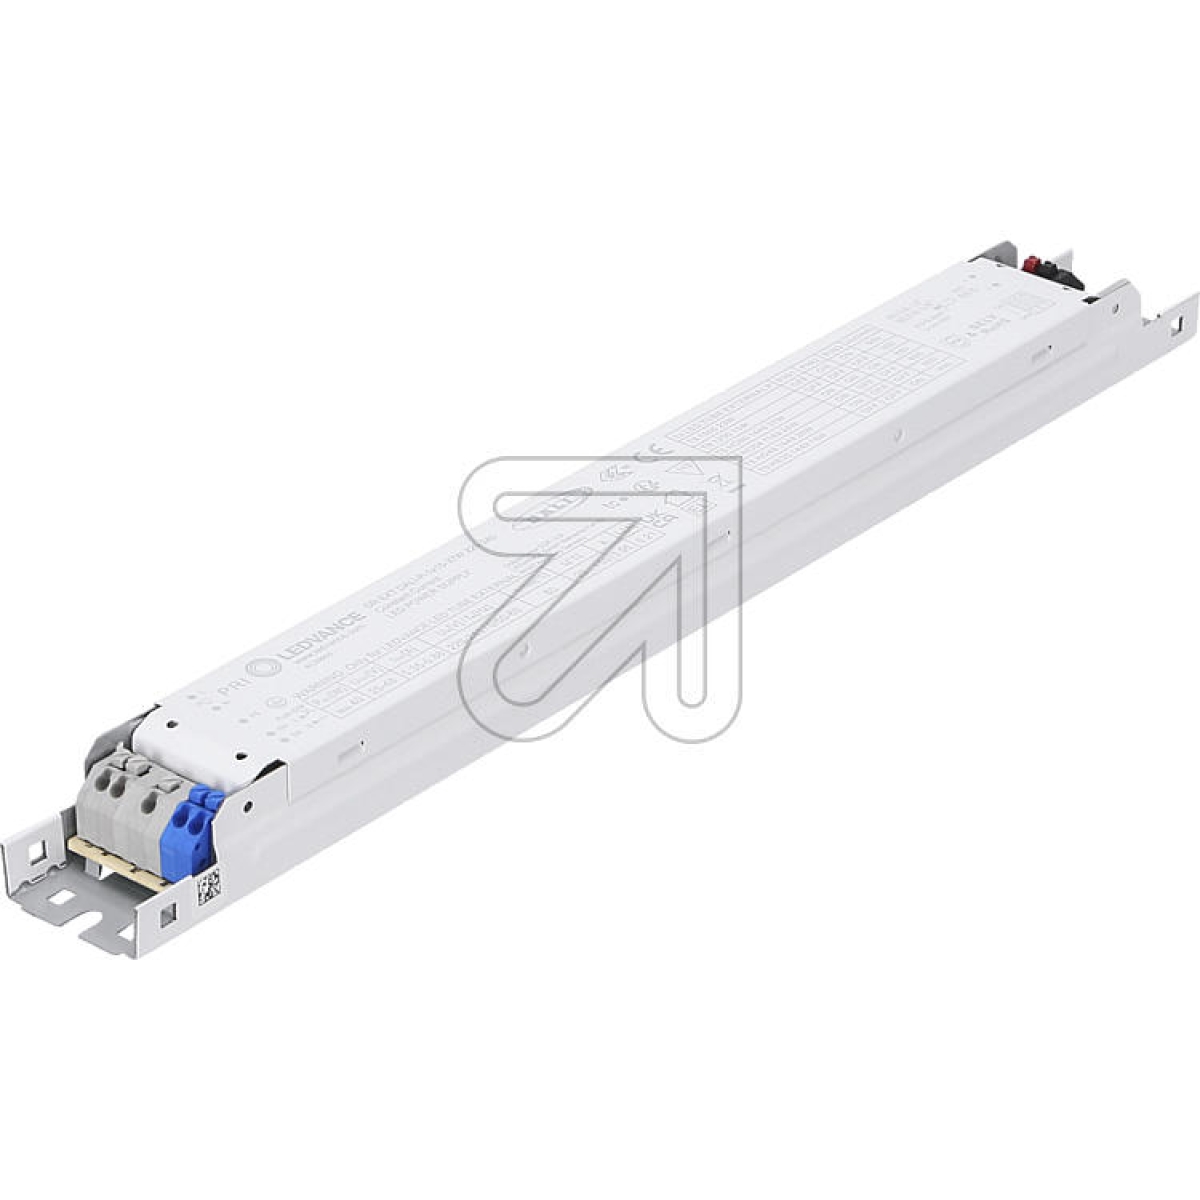 OSRAMDRIVER for LED TUBE EXT -1X15-37W 220-240V 5730632Article-No: 611845